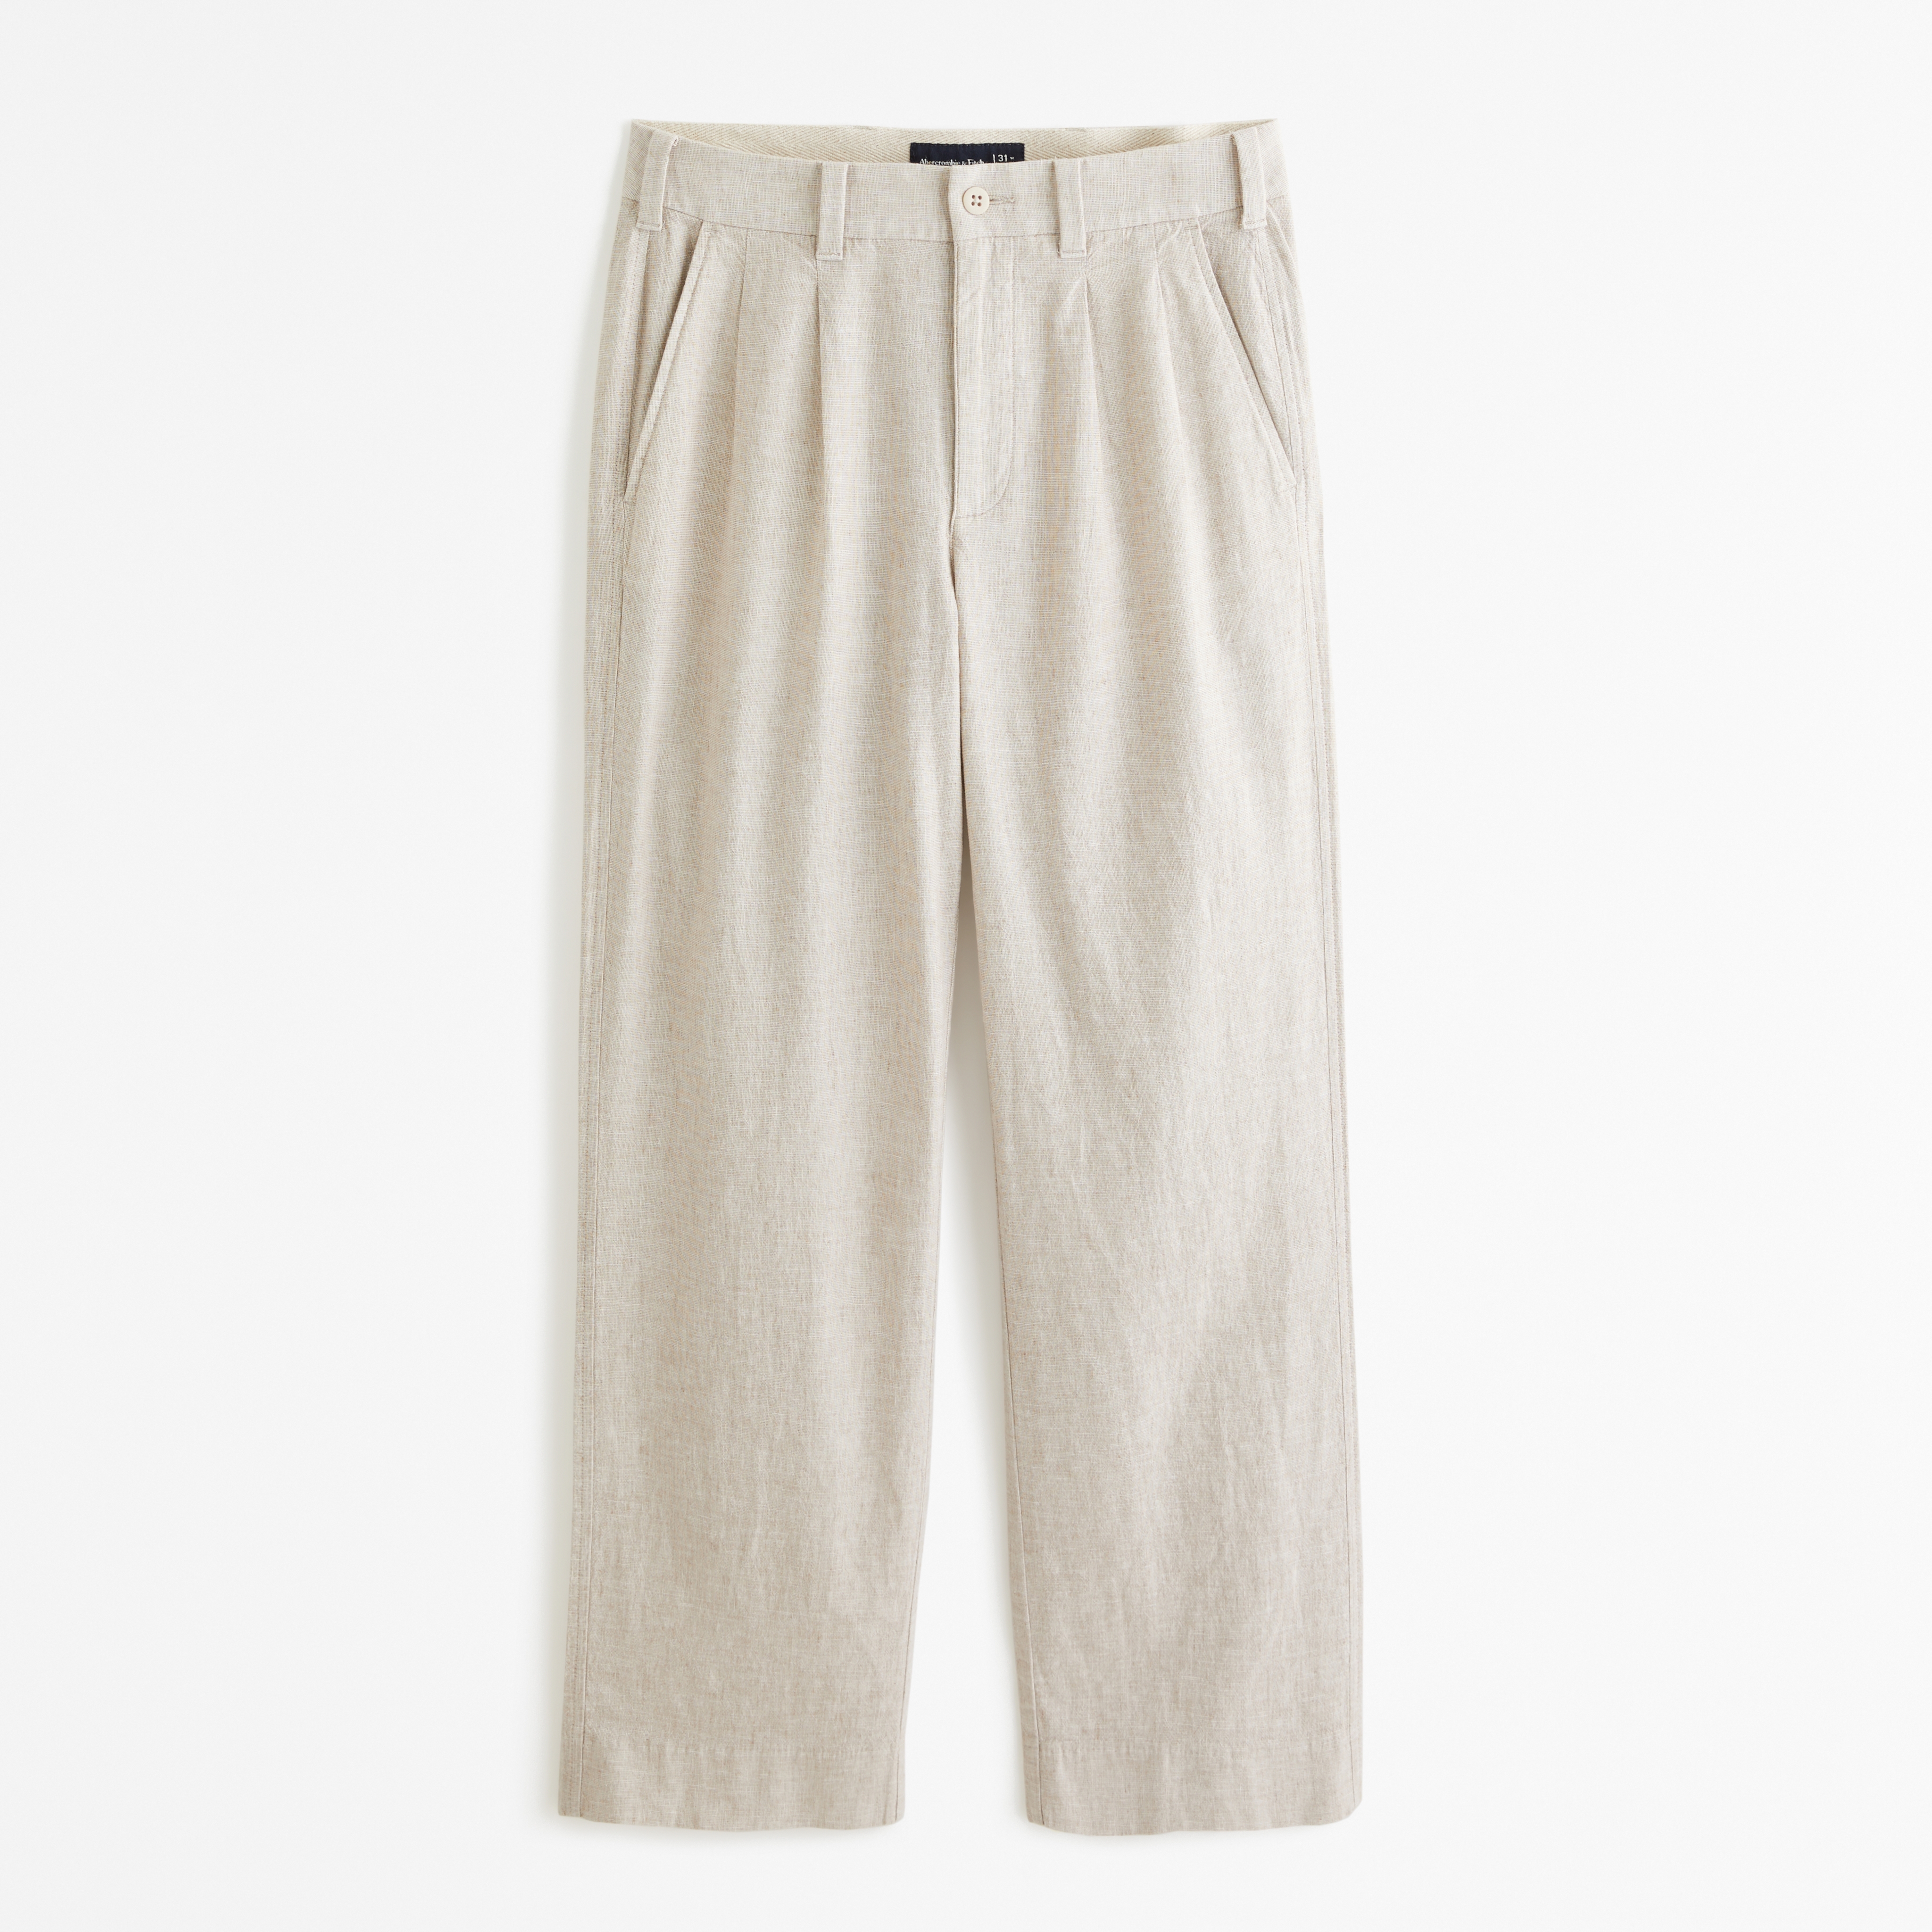 Tapered And Chic Trouser Pants